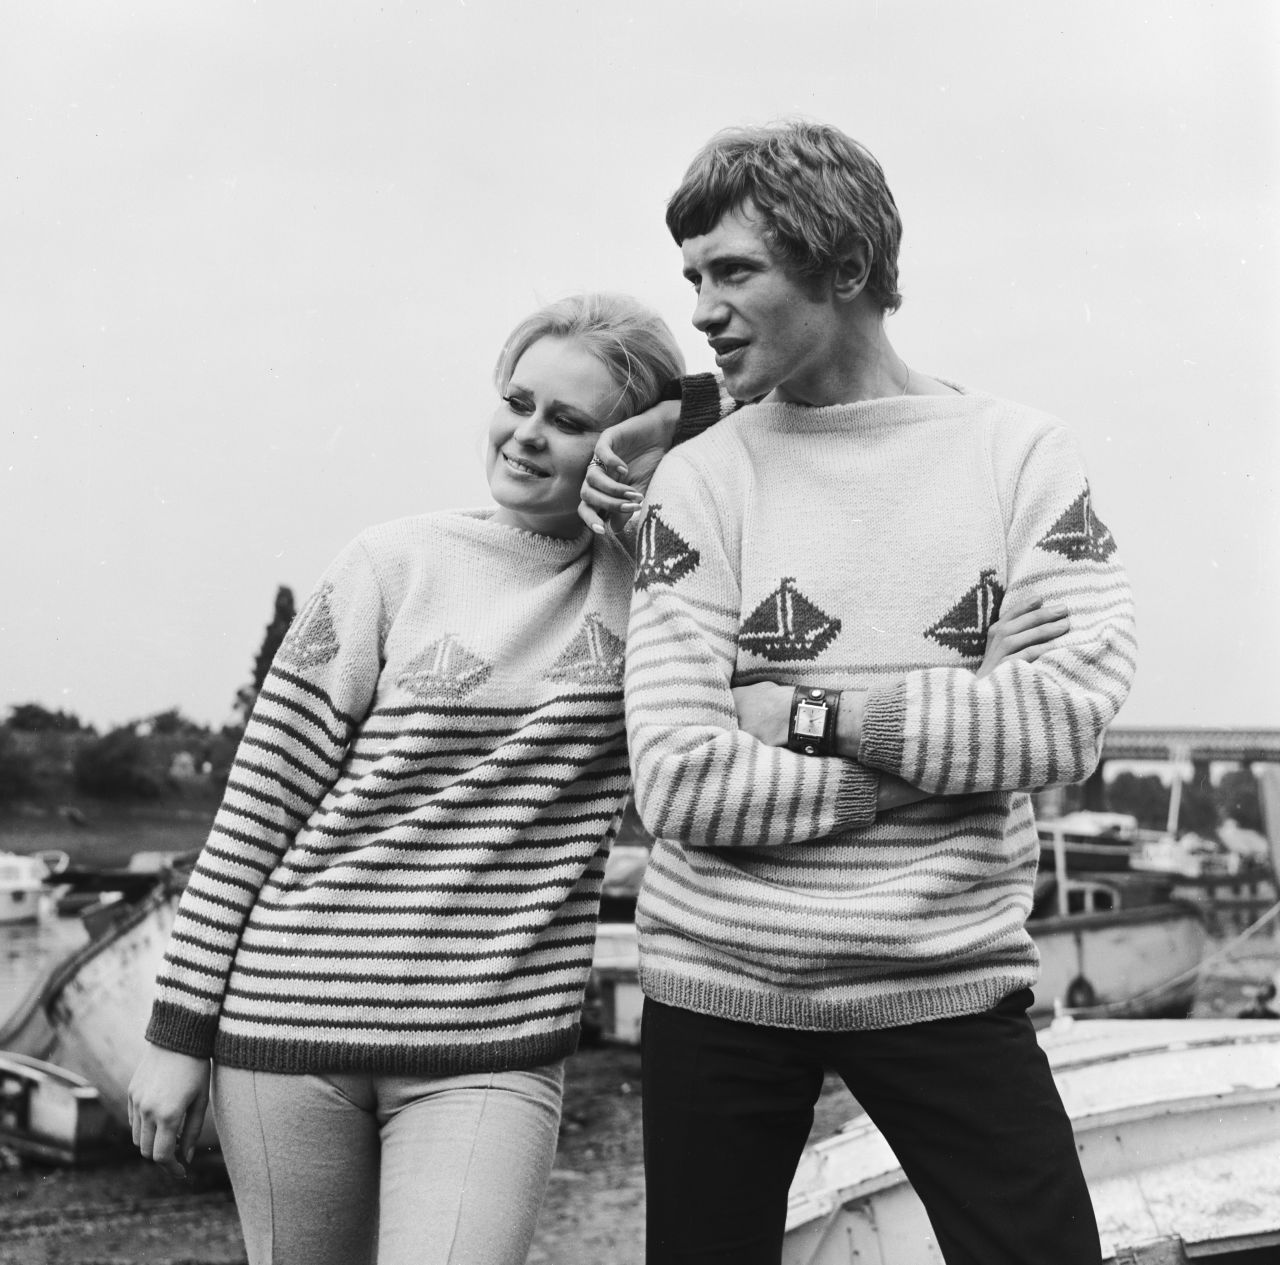 "A lot of nautical looks are from men's items that have crossed over into women's wear," said Butchart.<br />"But then there are also unisex items like the peacoat, dufflecoat, and stripes."<br />Male or female, who isn't on board with these 1968 knitted sweaters adorned with boats? 